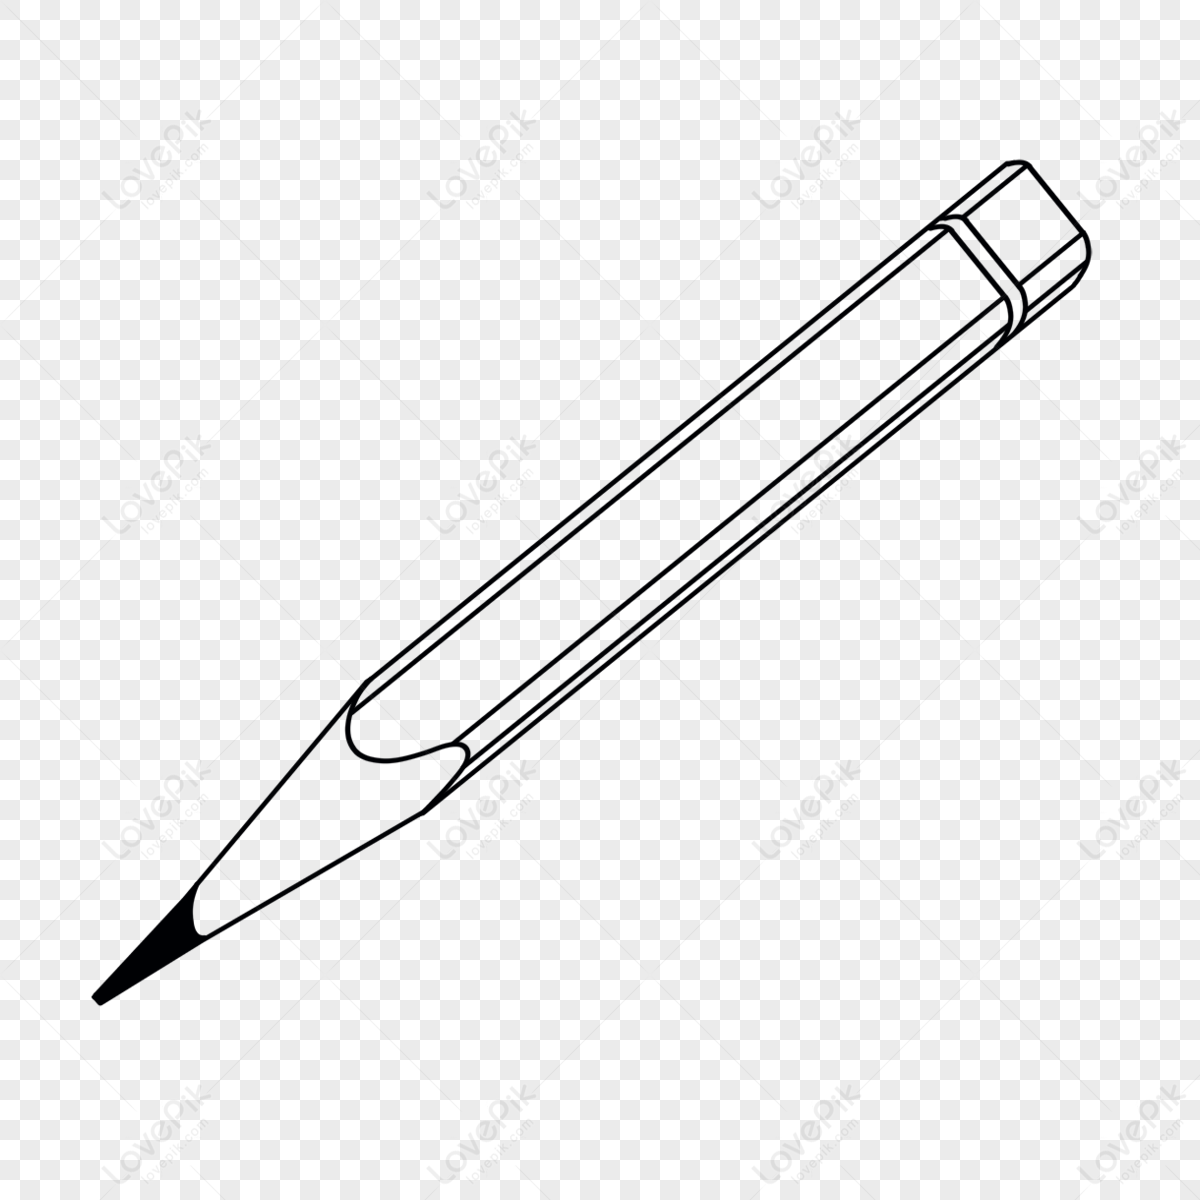 Black pencil color isolated on a transparent background 21938696 PNG